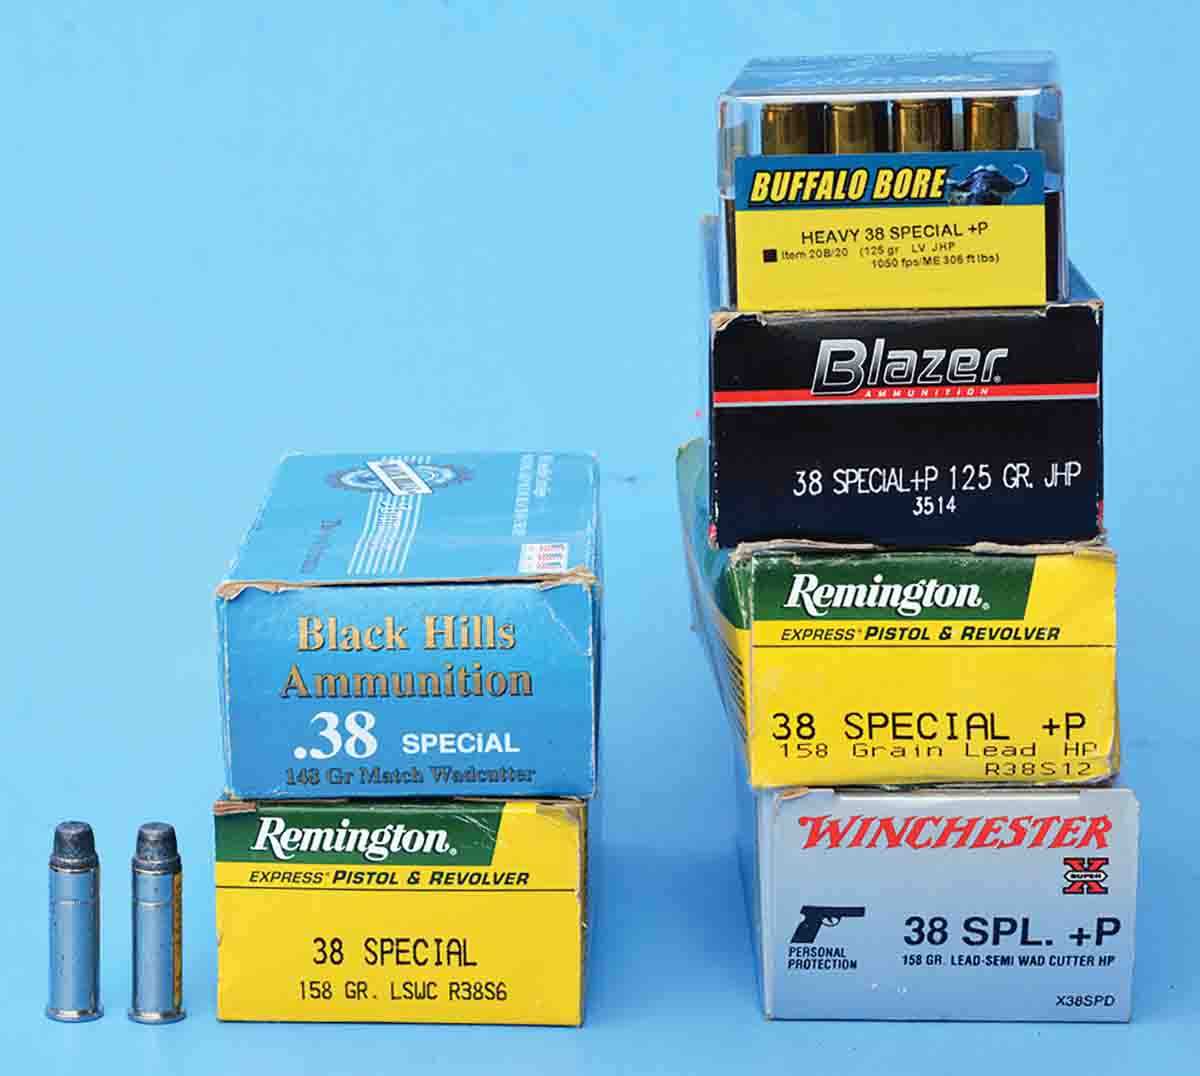 Virtually all ammunition companies still offer standard pressure .38 Special loads for vintage guns and target work such as Remington and Black Hills Ammunition (left), but due to their higher pressure, +P loads (right) are not suitable for all guns.